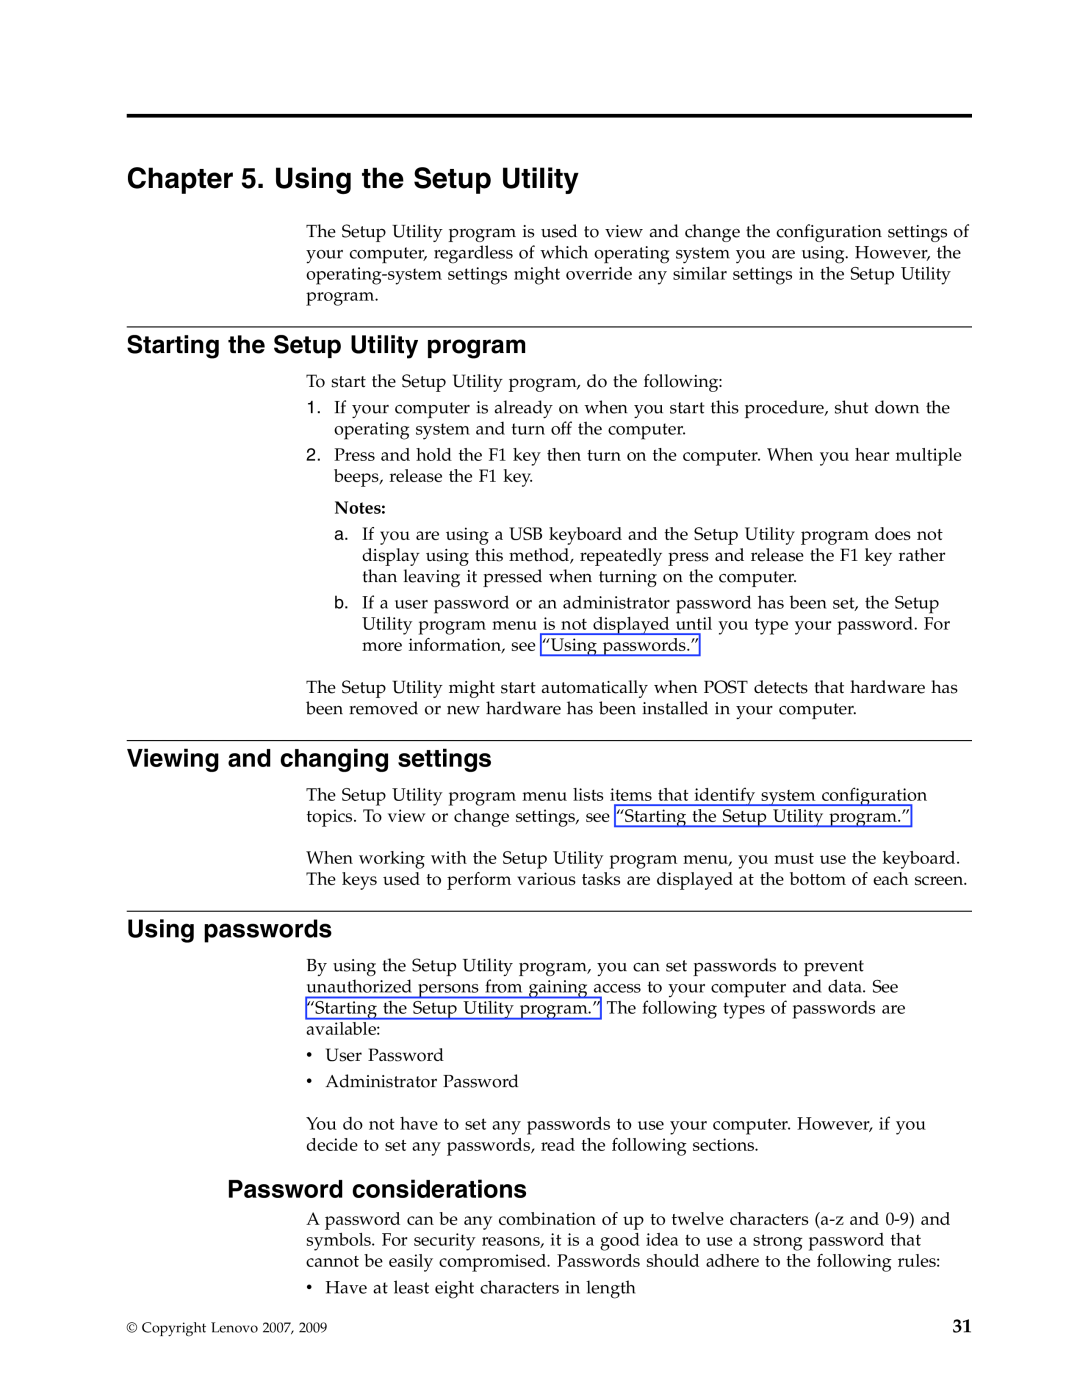 Lenovo 6019 Using the Setup Utility, Starting the Setup Utility program, Viewing and changing settings, Using passwords 